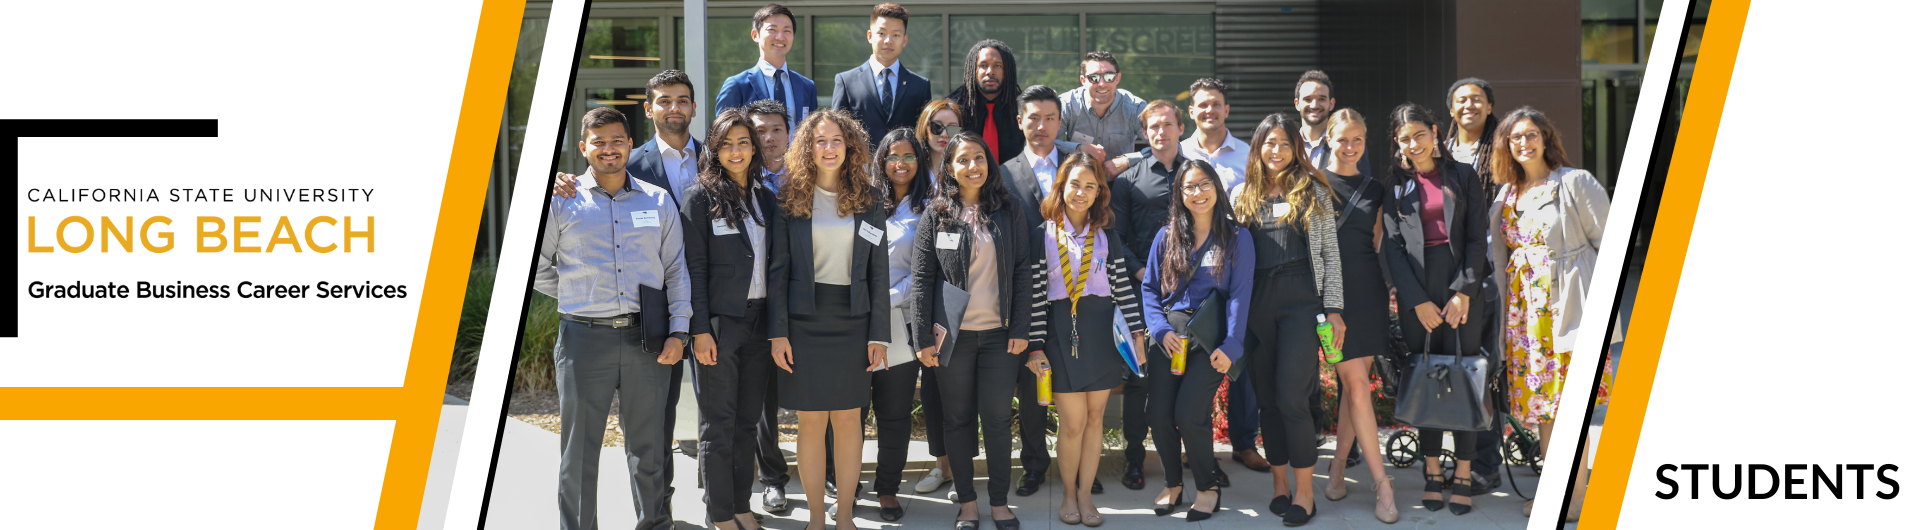 CSULB Graduate Business Career Services - Students